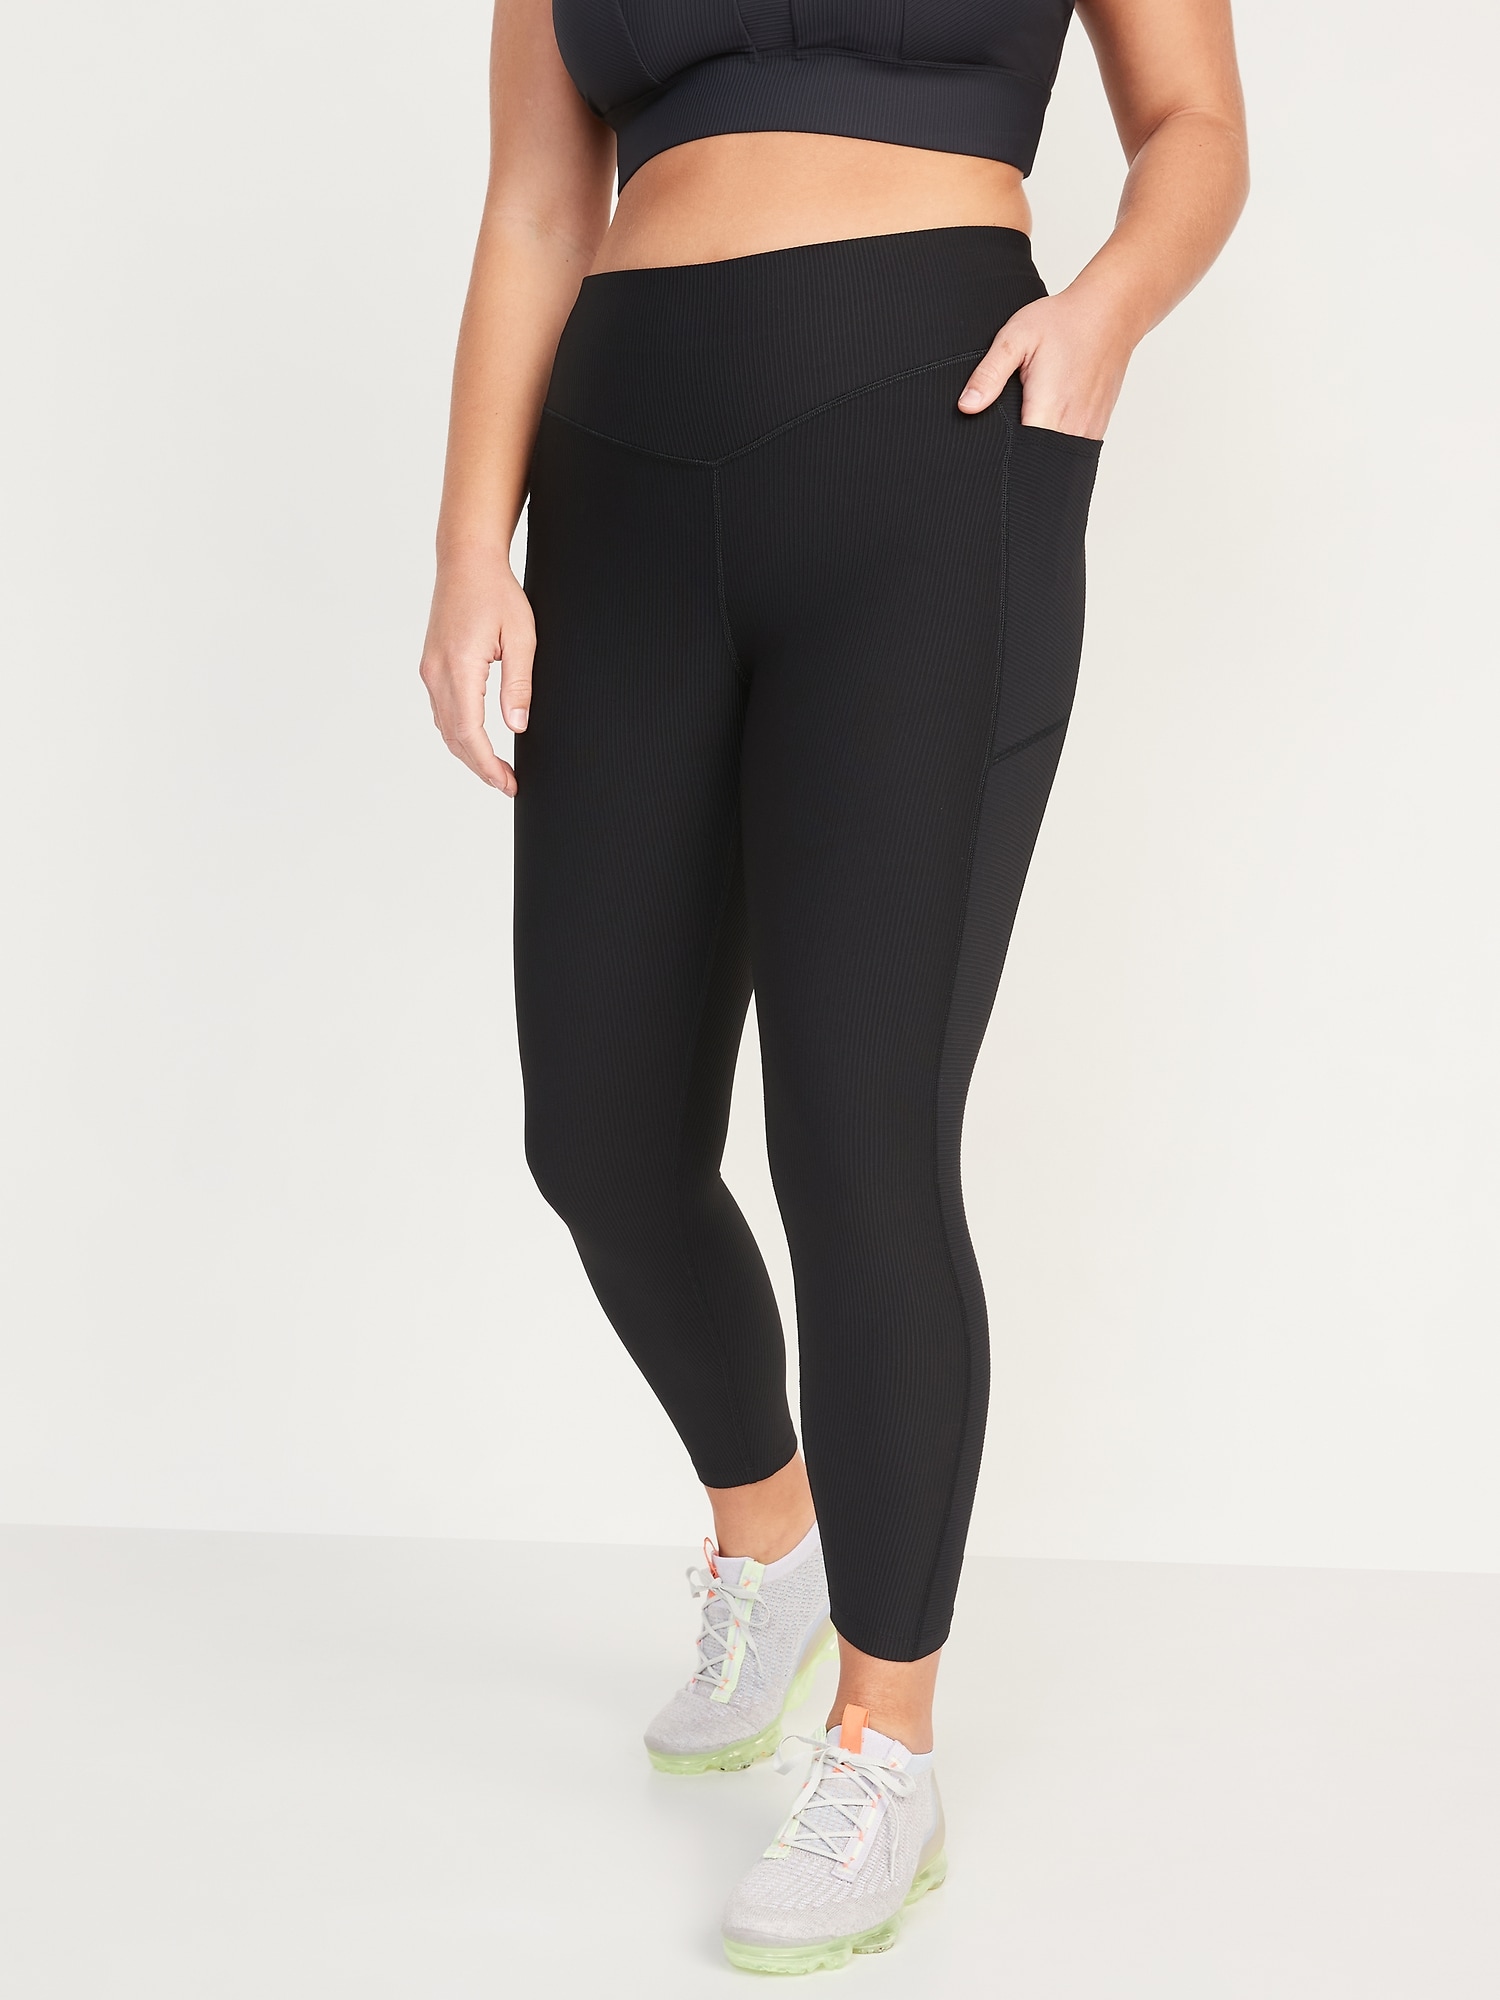 Old Navy Army Athletic Leggings for Women